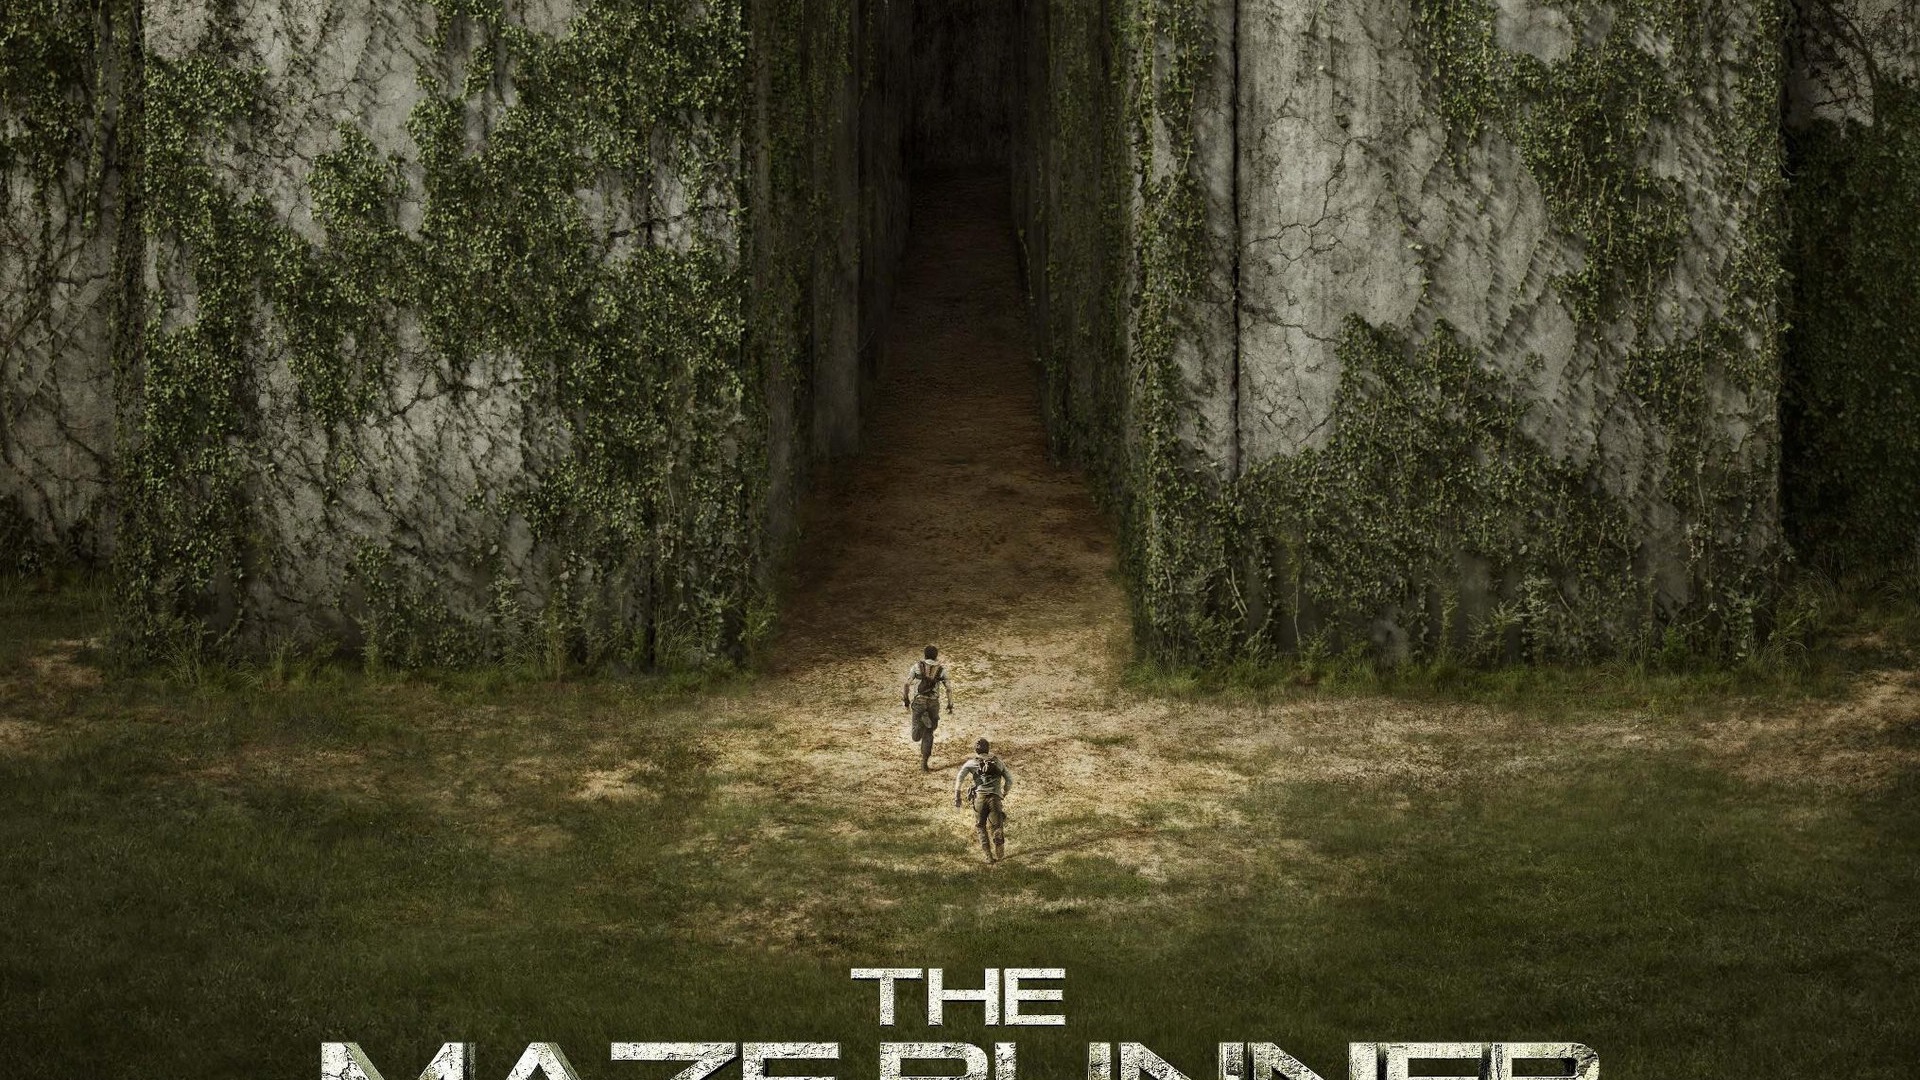 The Maze Runner HD movie wallpapers #5 - 1920x1080